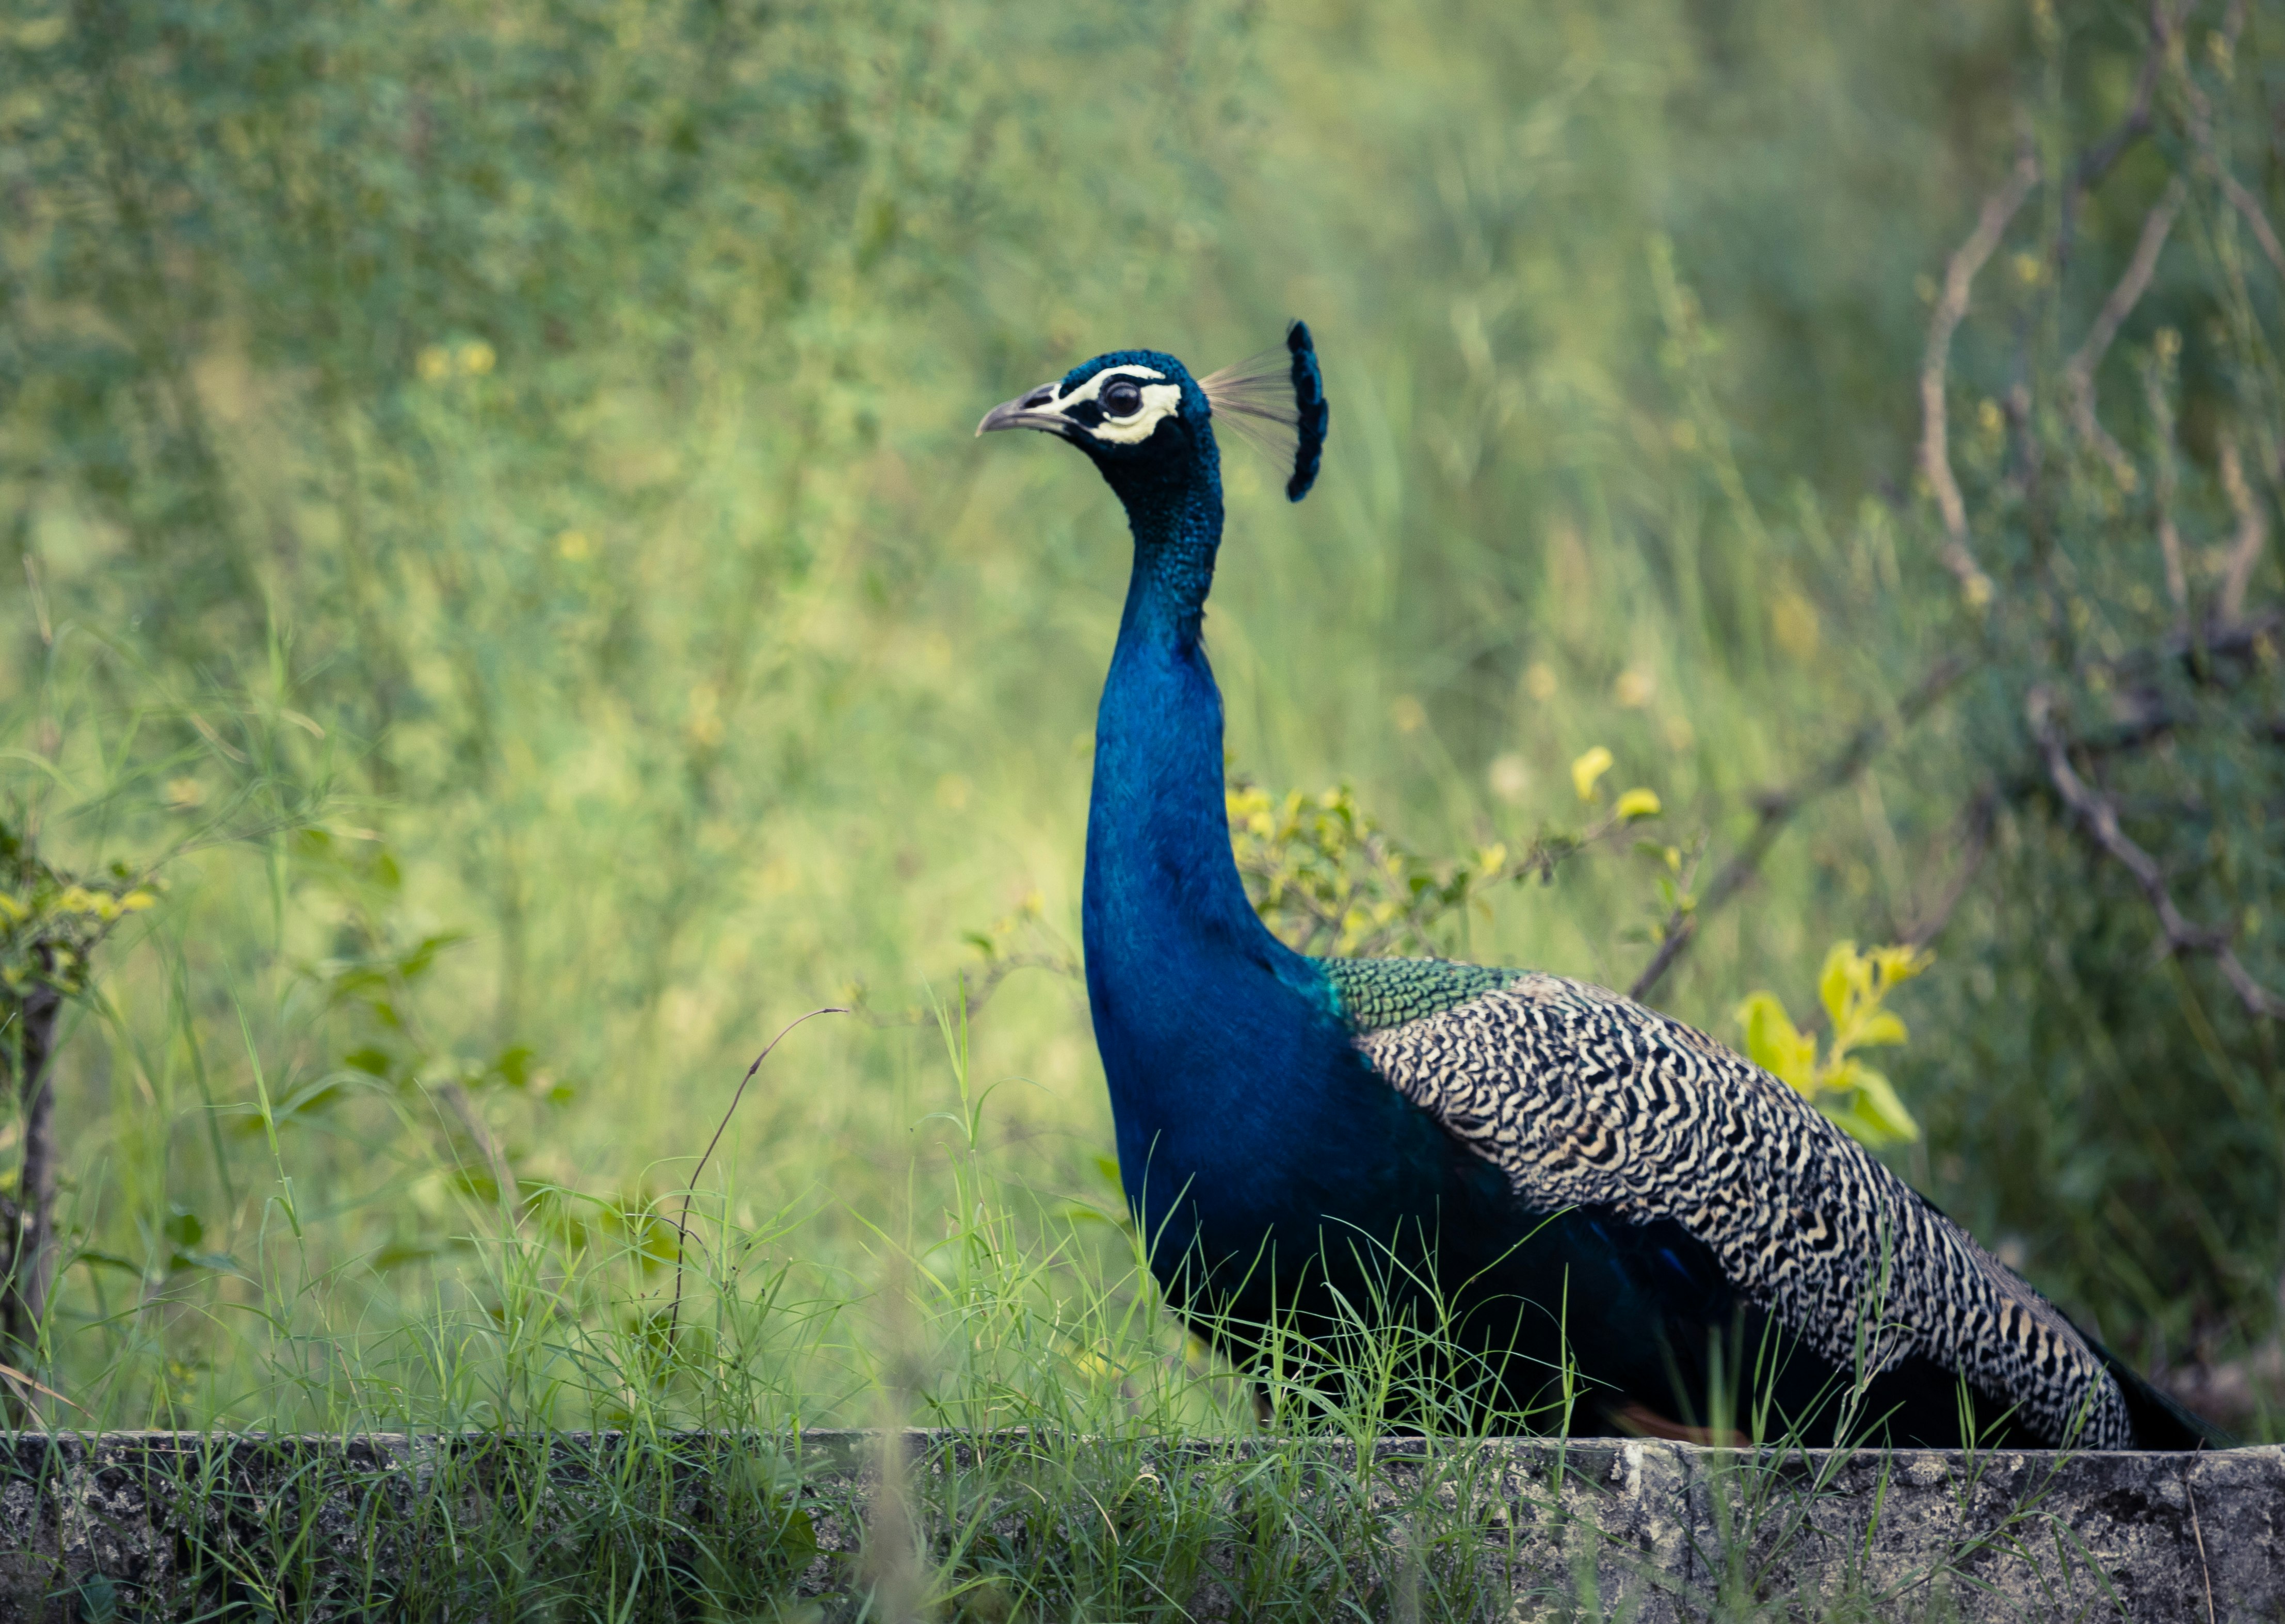 blue peacock on green grass field during daytime